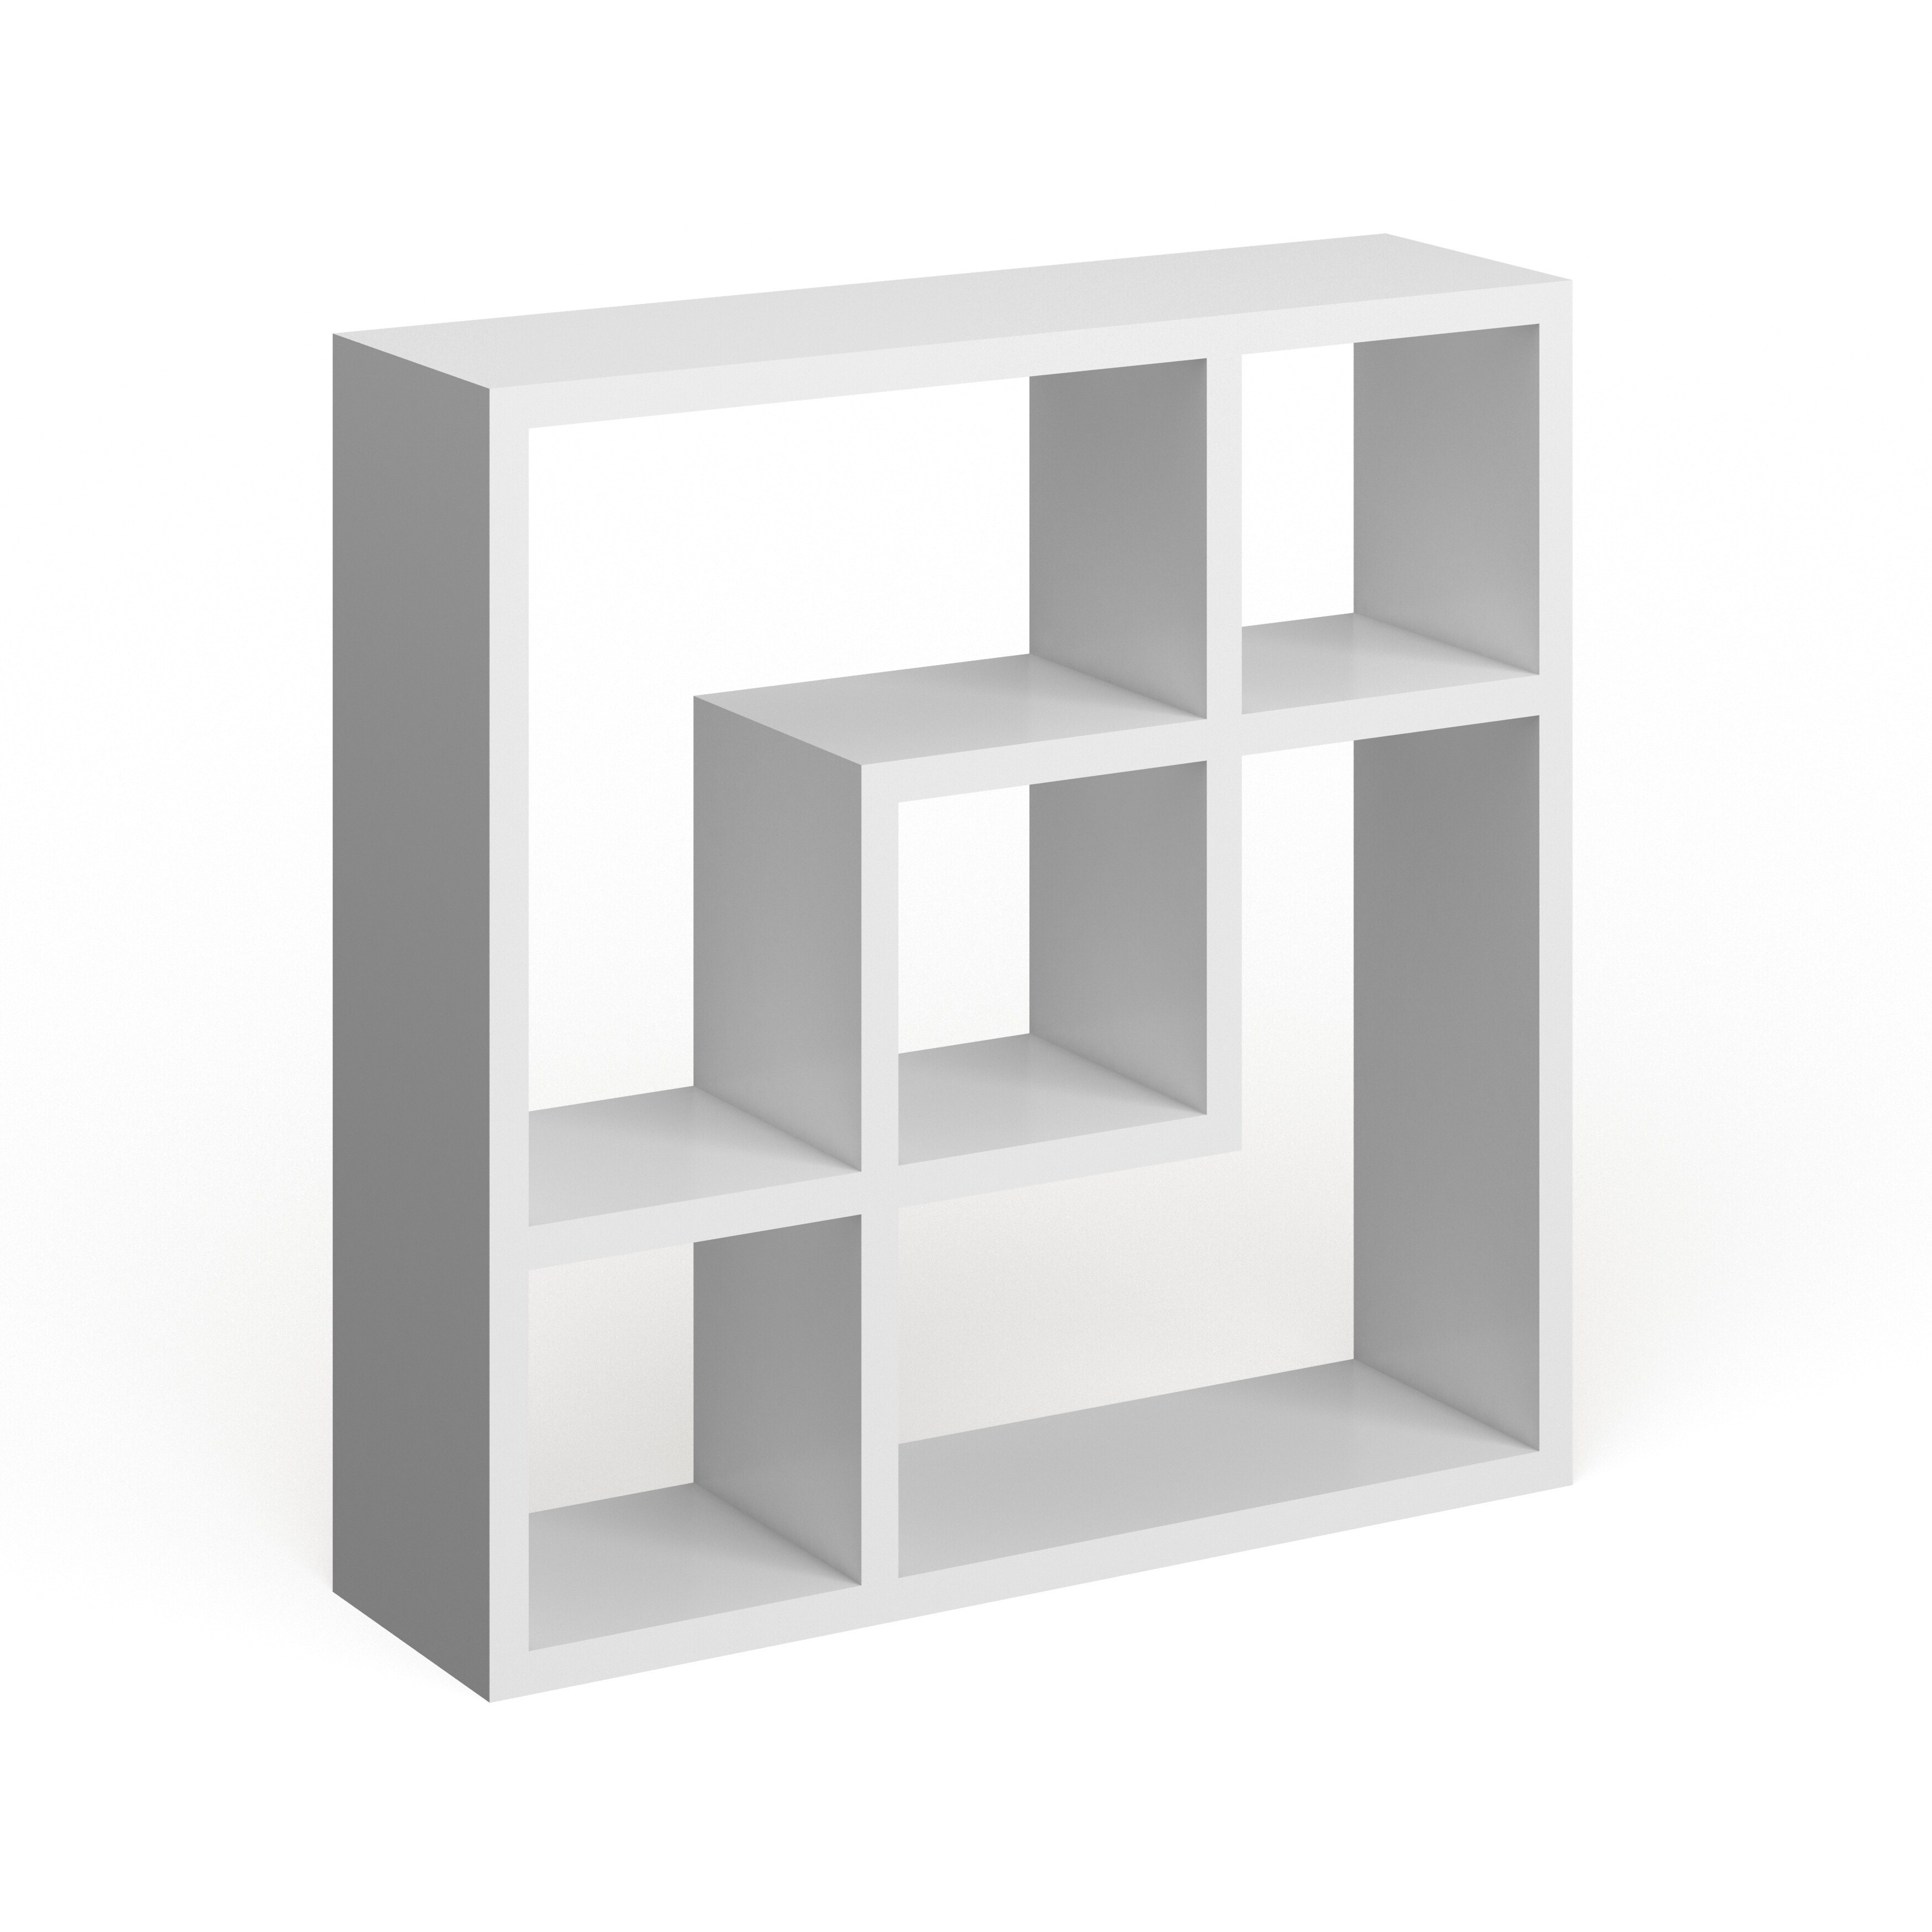 Geometric Square Wall Shelf with 5 Openings - Bed Bath & Beyond